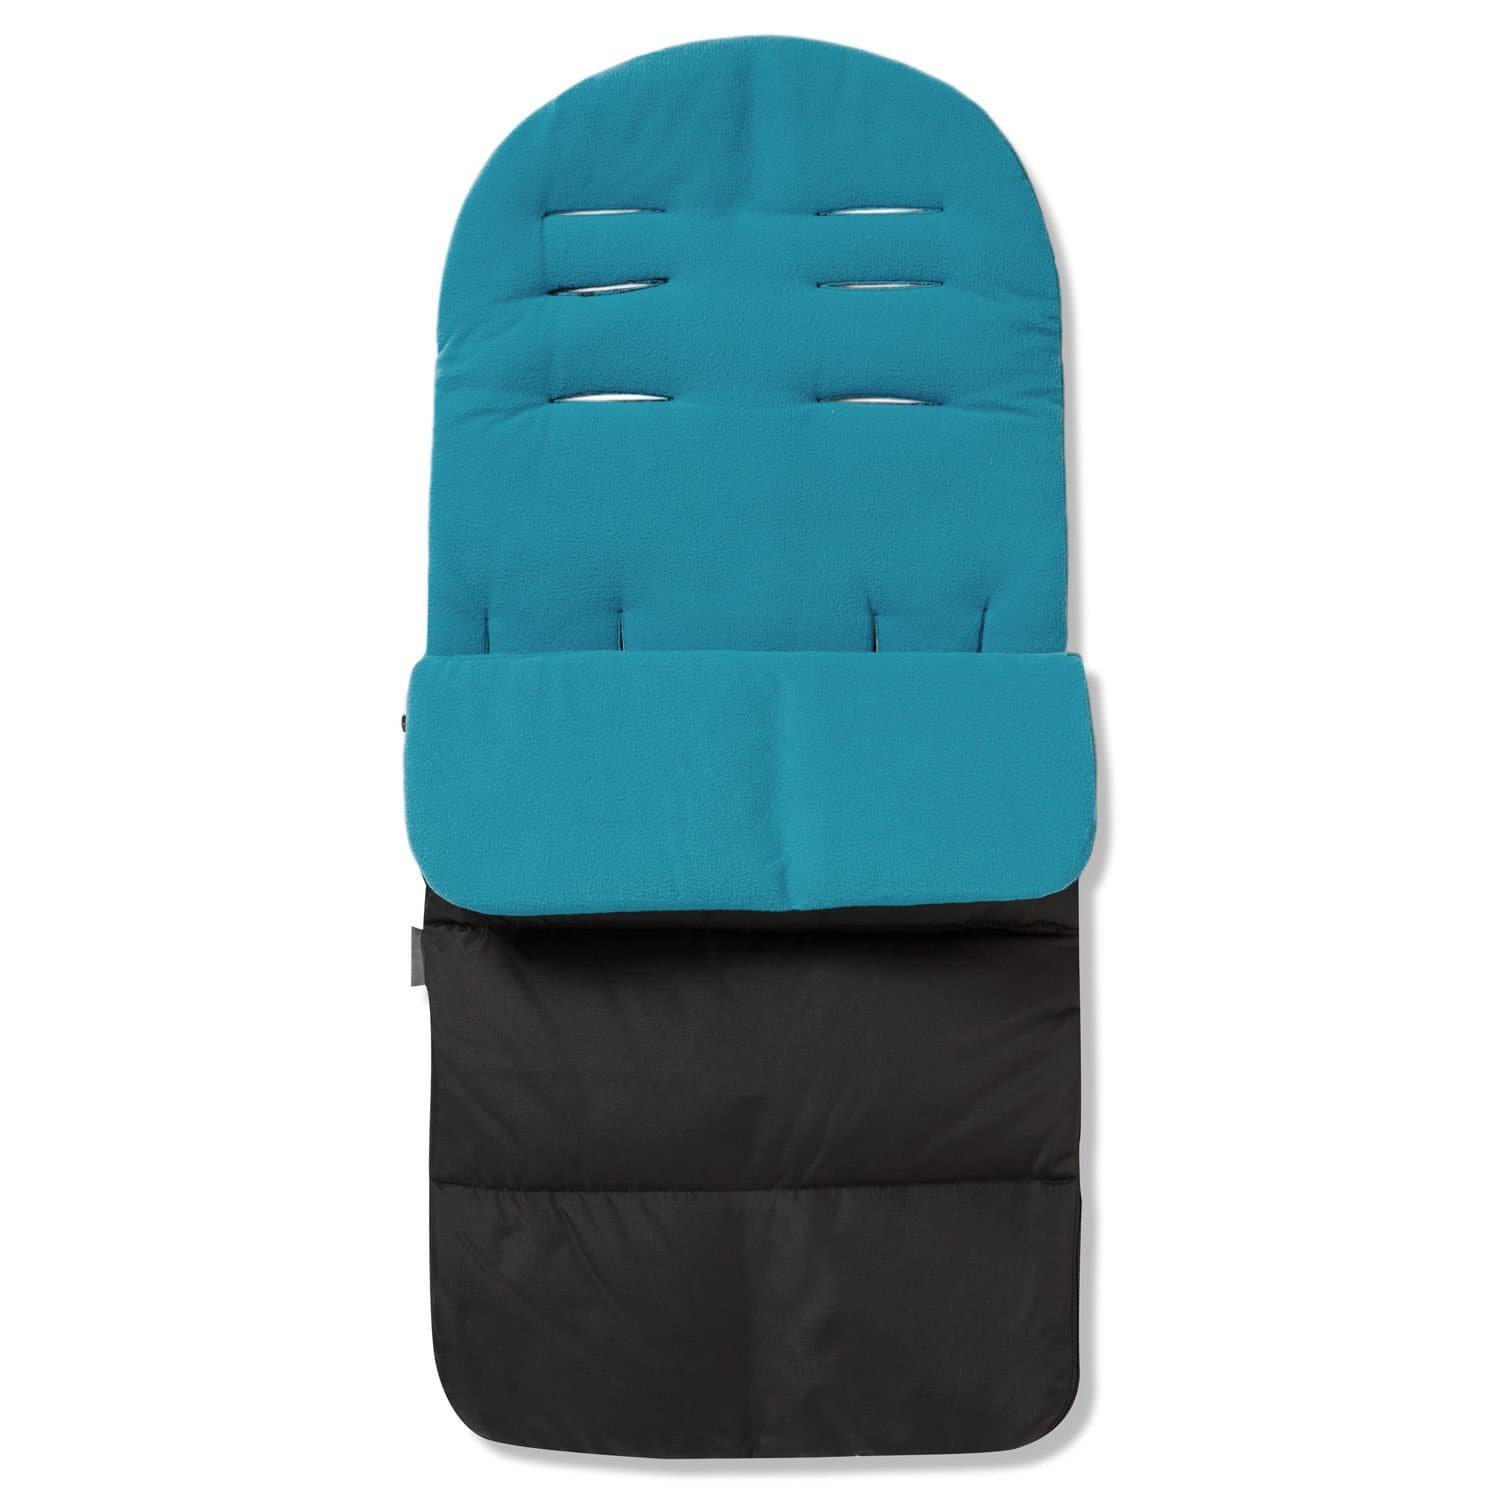 Premium Footmuff / Cosy Toes Compatible with Seed - Ocean Blue / Fits All Models | For Your Little One